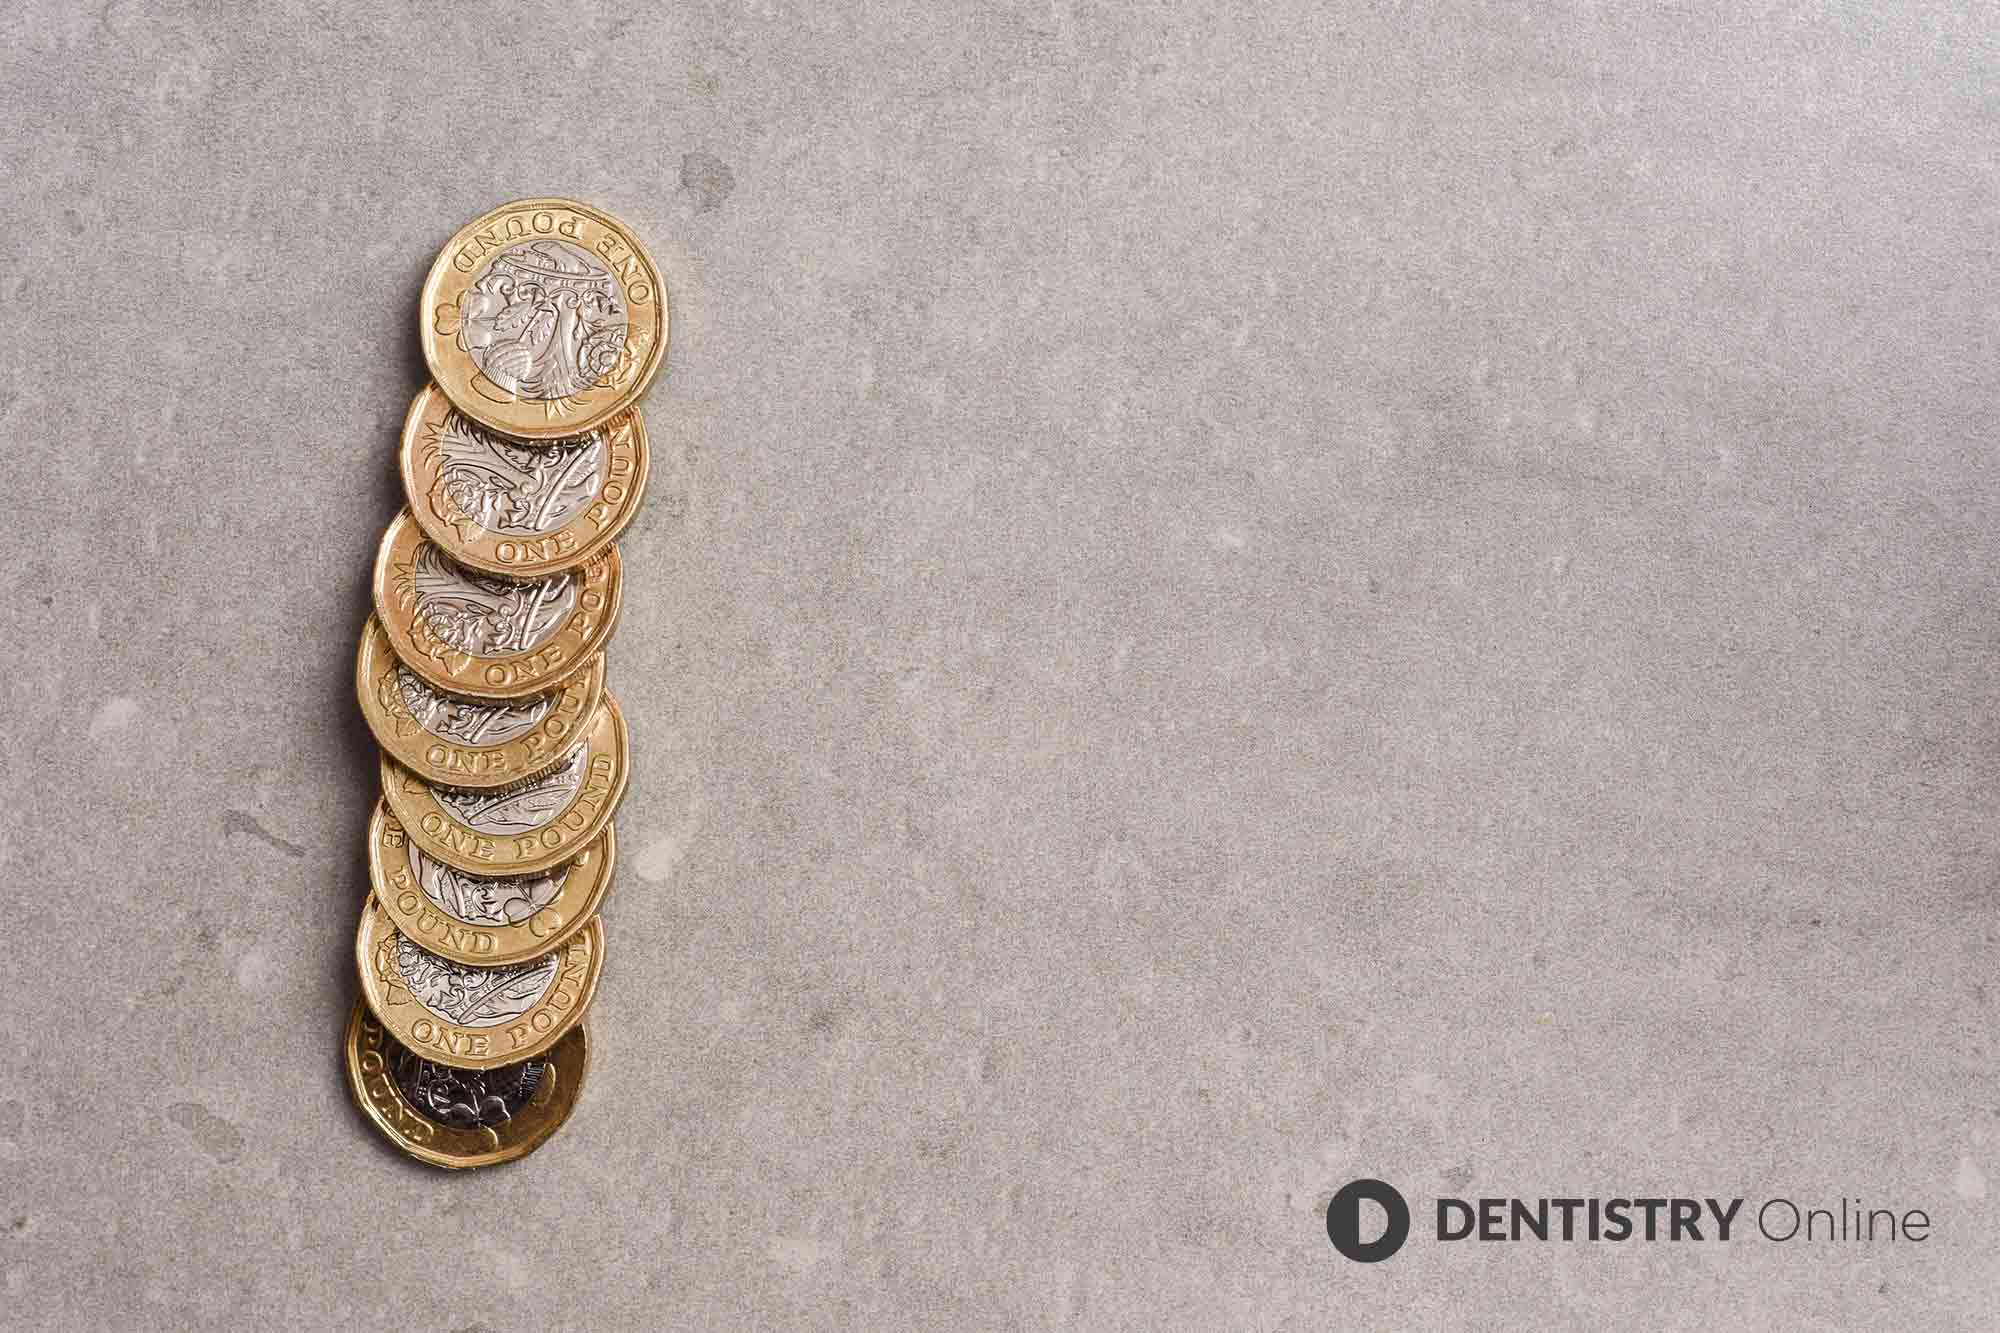 The annual retention fee (ARF) for 2021 will not change, the General Dental Council (GDC) has confirmed